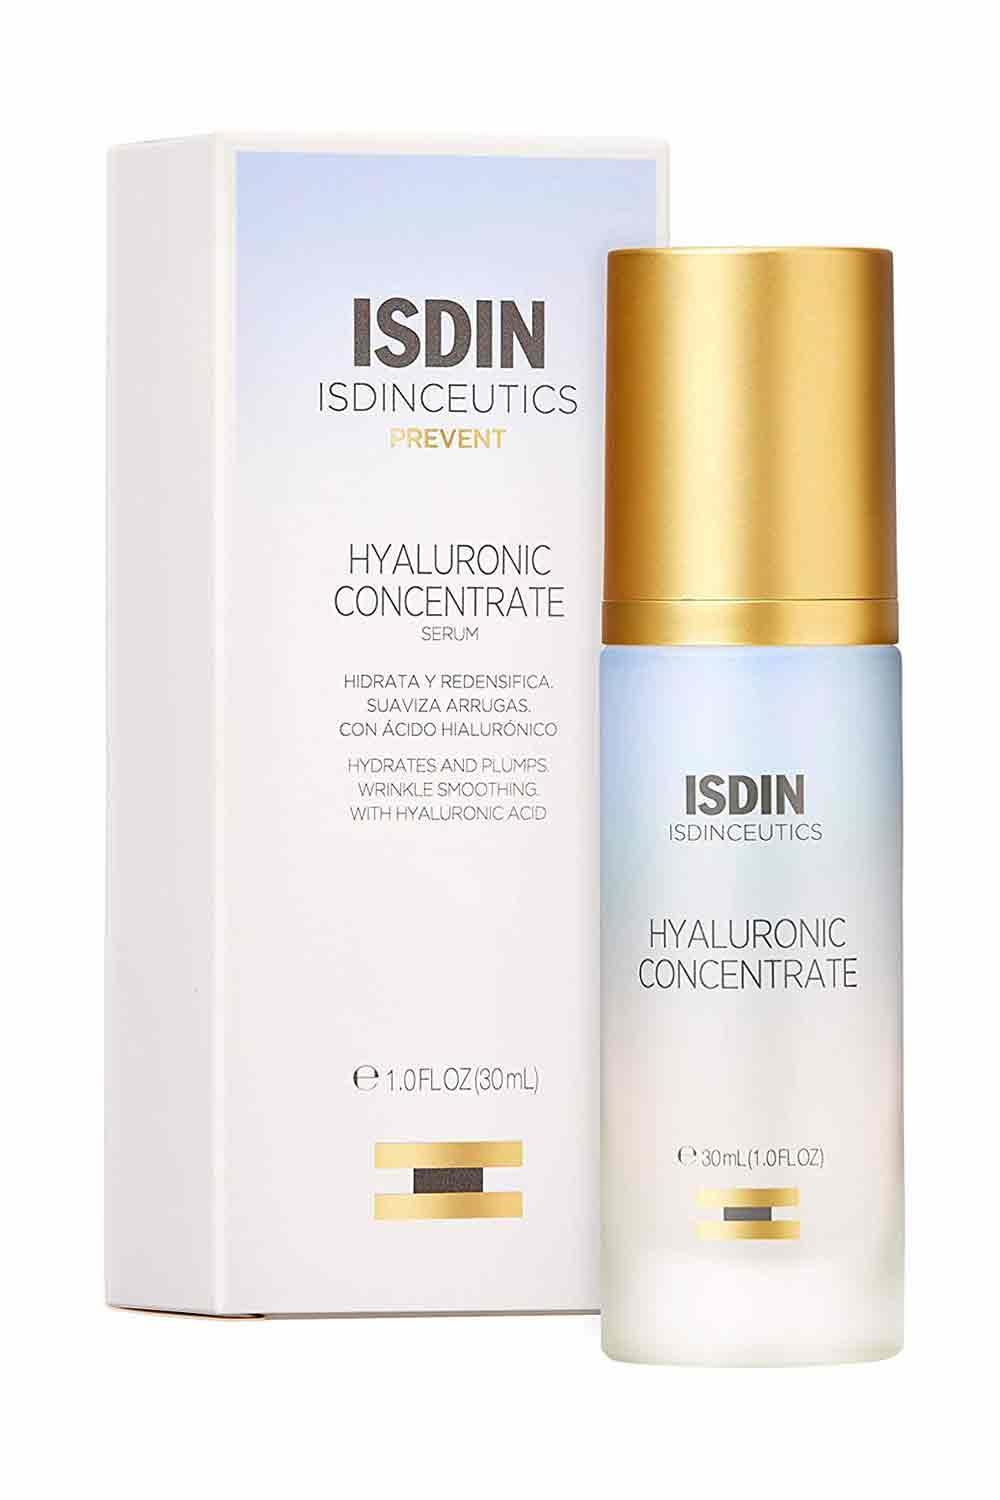 isd8. Hyaluronic Concentrate Isdinceutics, Isdin